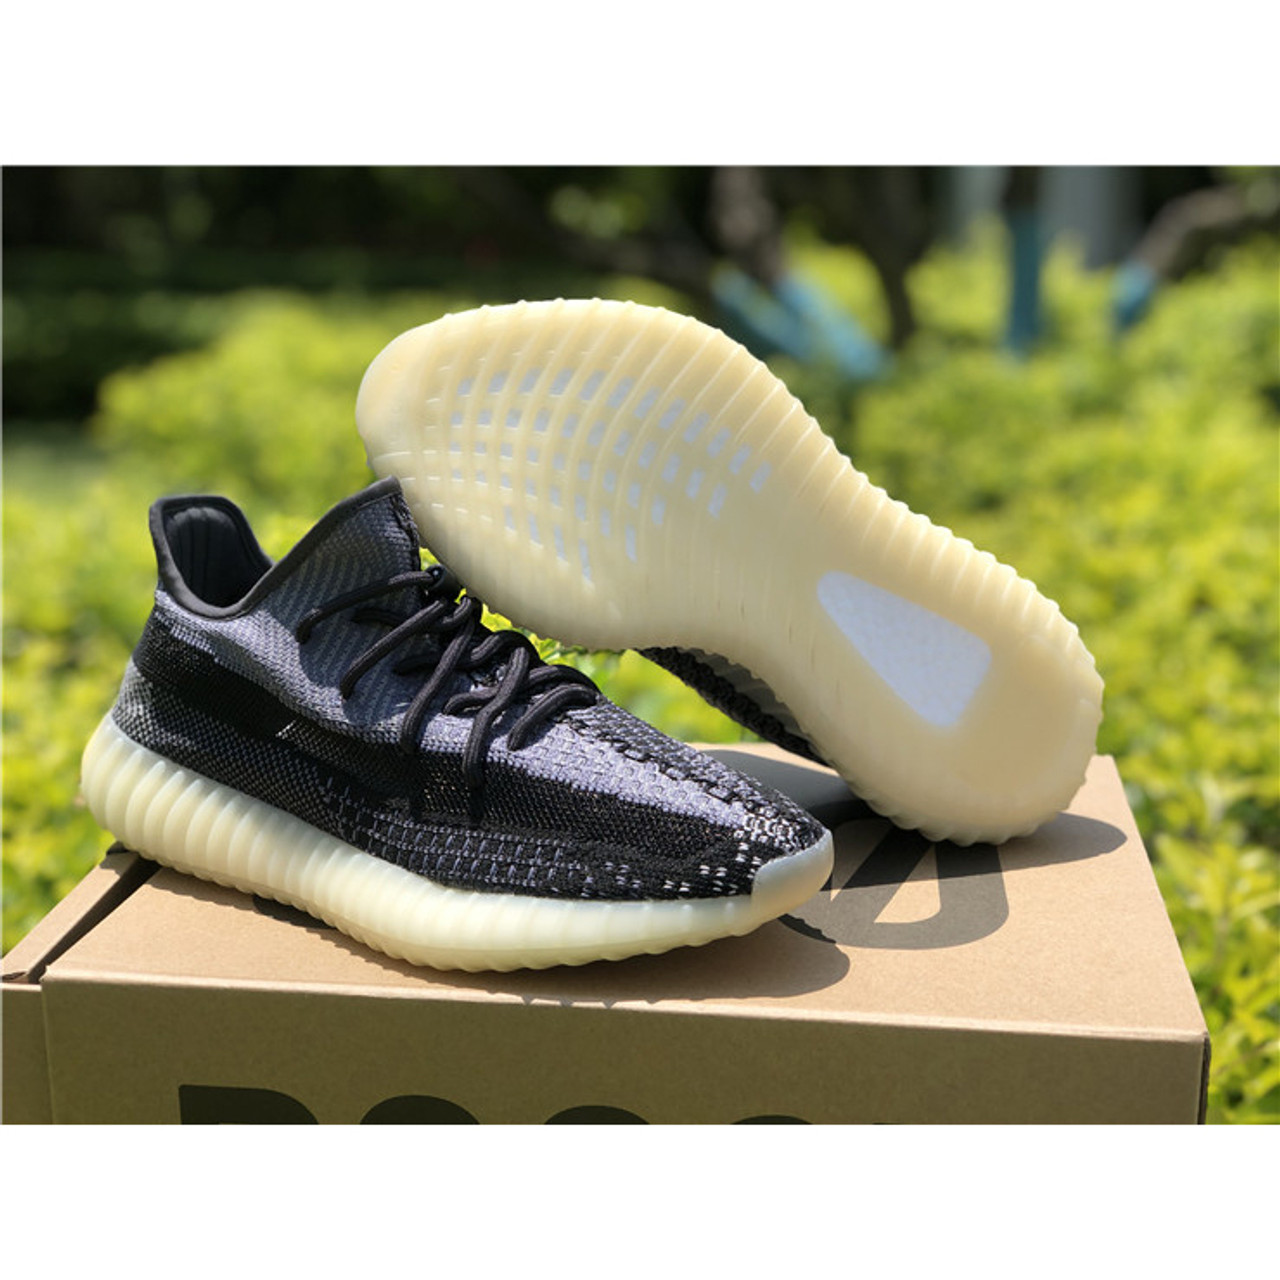 where to buy the best stockX UA High quality replica kanye west x Adidas  Yeezy boost 350 v2 "oreo" colorway Sneaker Hypedripz is the best high  quality trusted clone replica fake designer